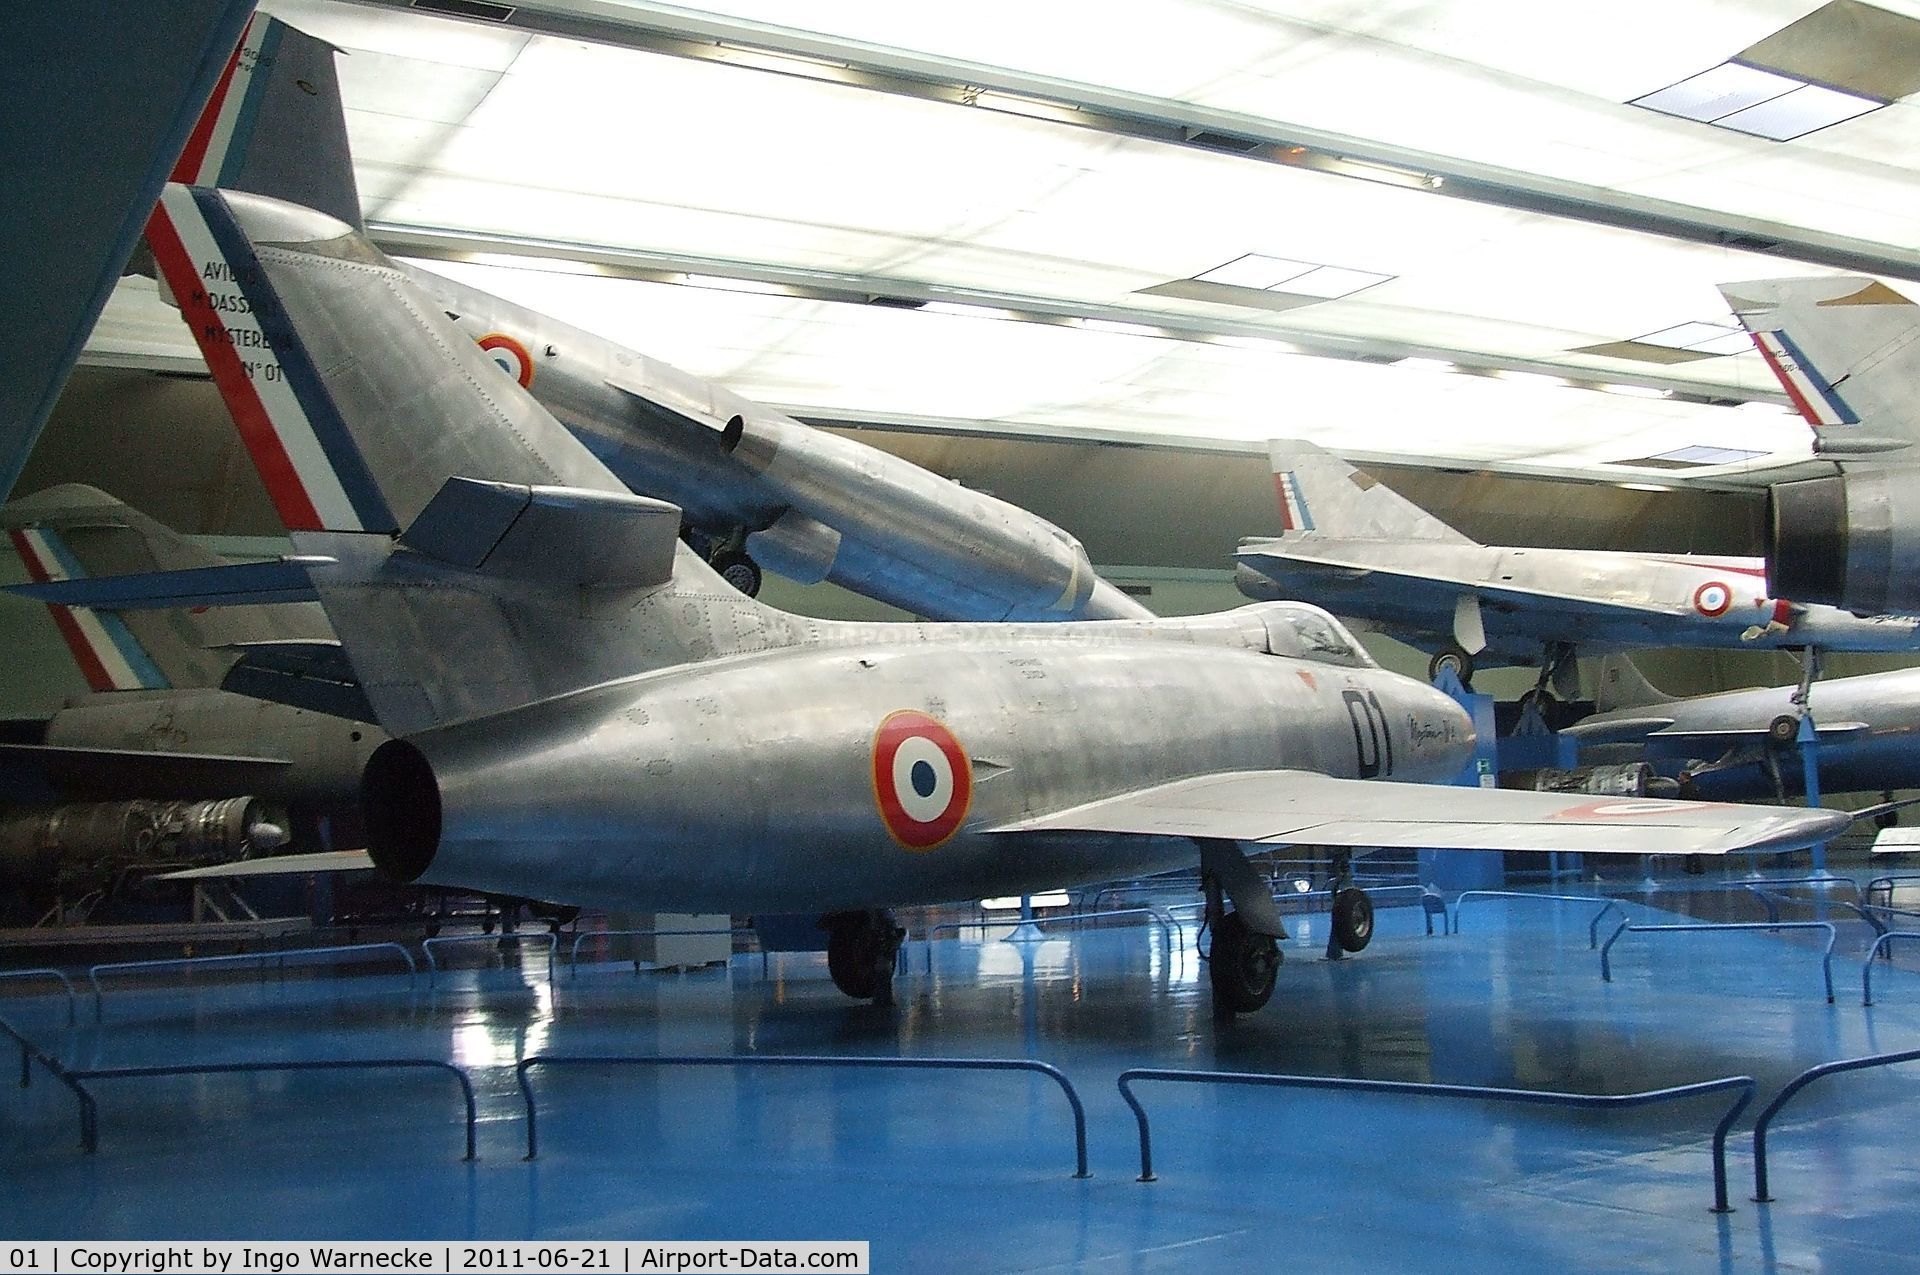 01, Dassault Mystere IVA C/N Not found 01, Dassault Mystere IV A prototype at the Musee de l'Air, Paris/Le Bourget